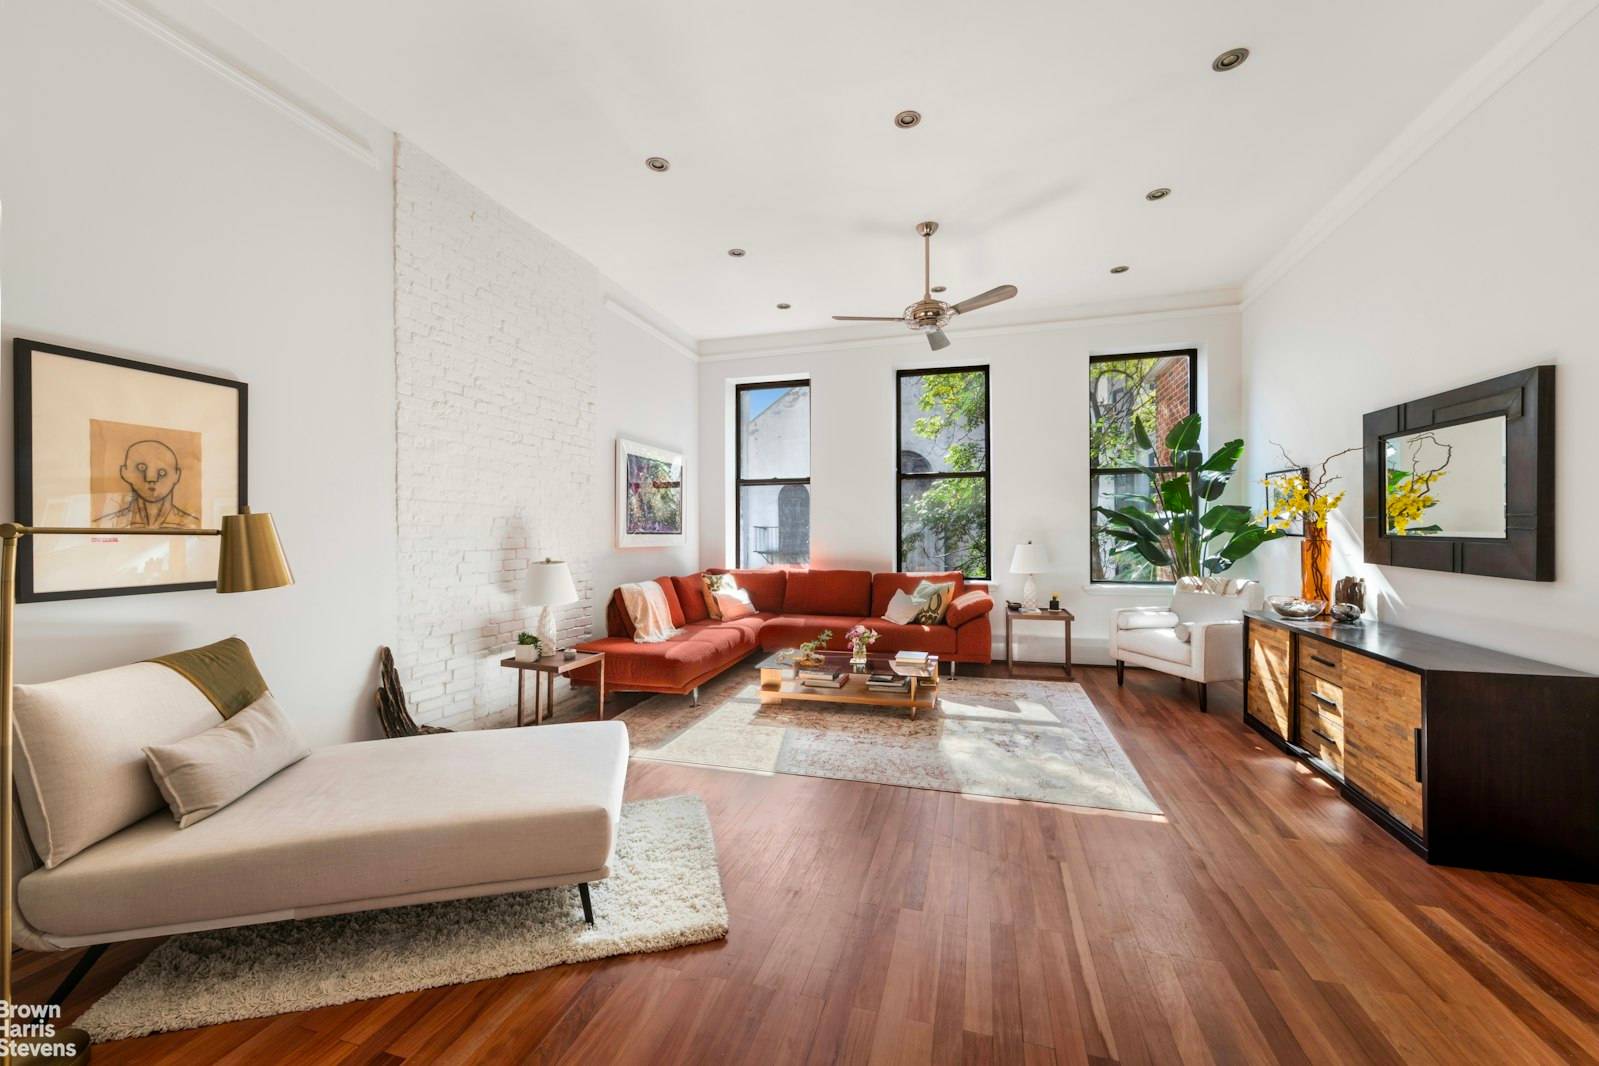 Discover the epitome of refined urban living in this renovated beautiful and sunny half house condo perched on a quiet tree lined street in fantastic South Harlem.